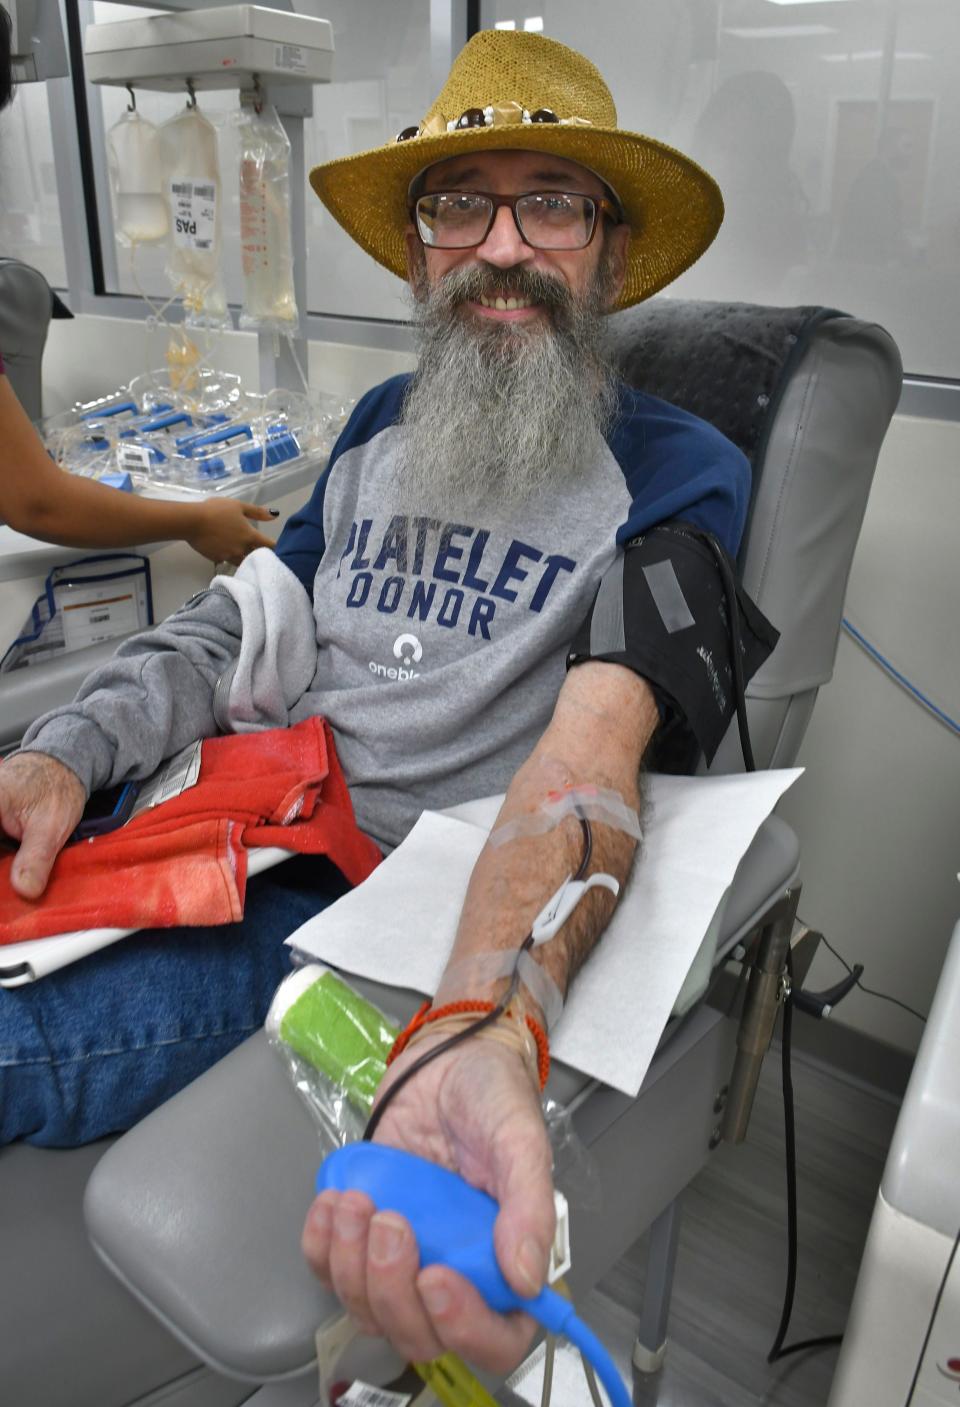 Bill Lundell of Indian Harbour Beach has now given 150 gallons of blood over the last 37 years. He reached that milestone at the OneBlood location on 789 Babcock St., in NASA Plaza in Melbourne, near Makotos Japanese Steakhouse.